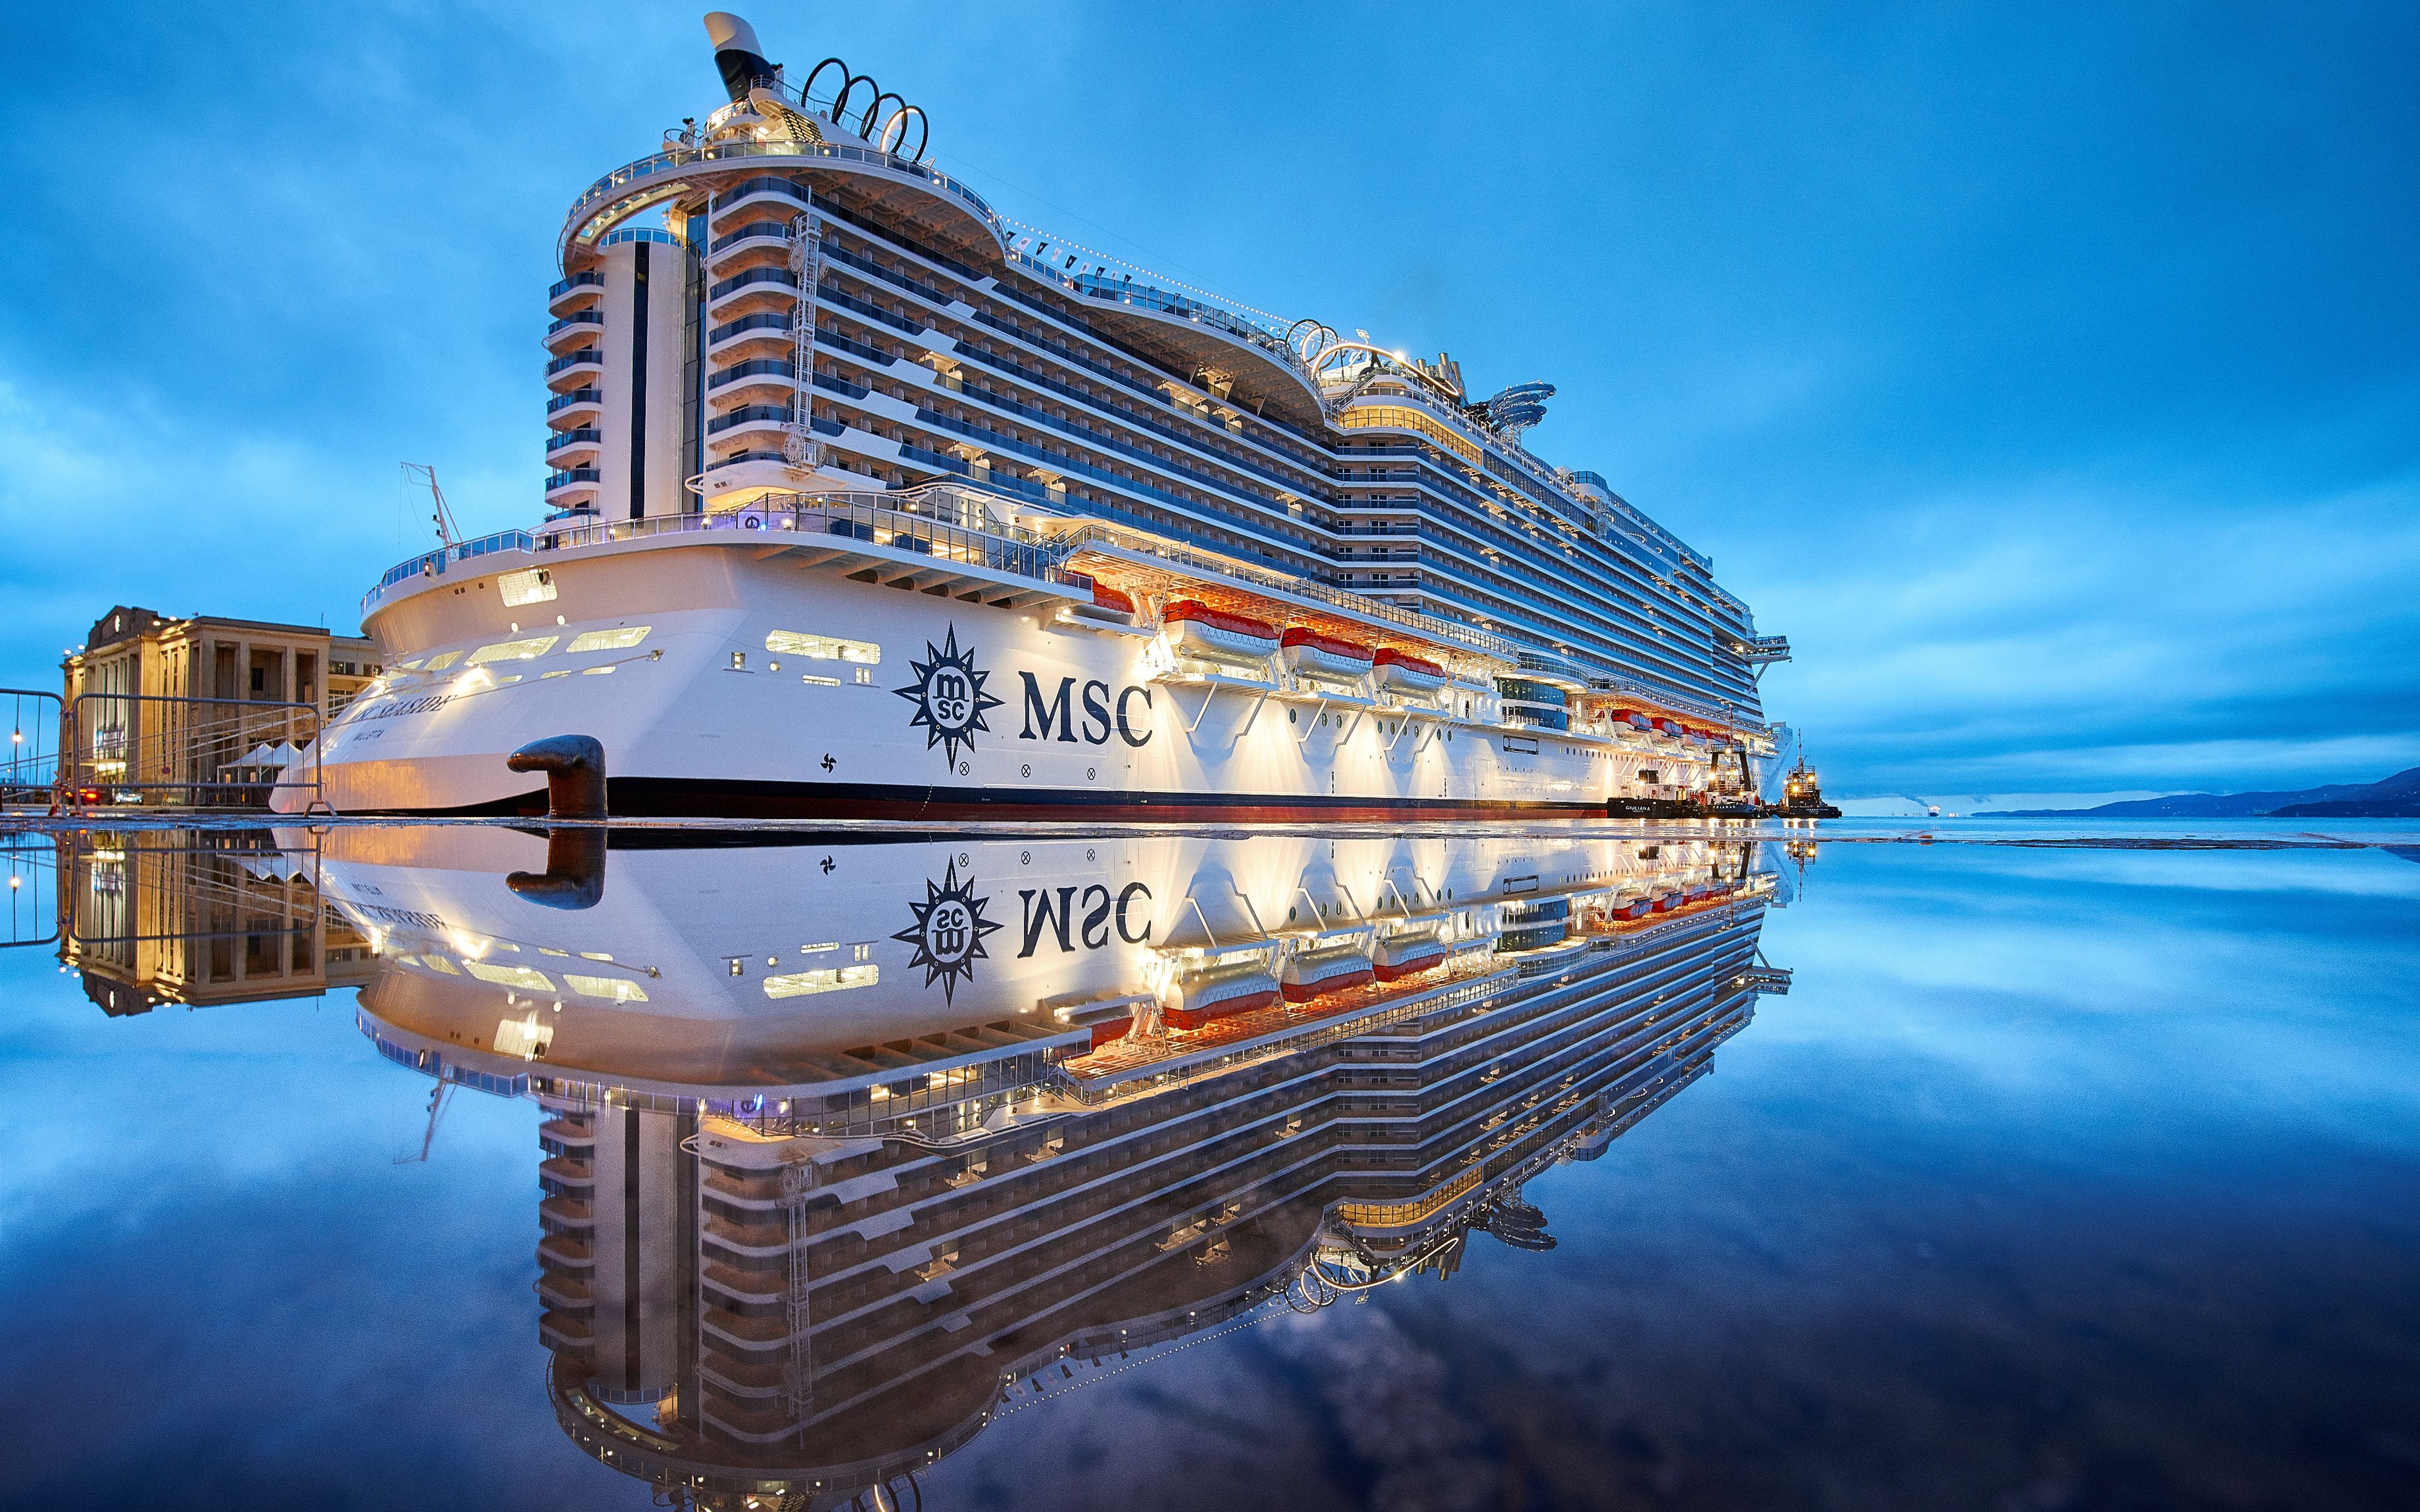 Download wallpaper MSC Seaside, 4k, port, cruise ship, sea, Seaside, MSC Cruises for desktop with resolution 3840x2400. High Quality HD picture wallpaper